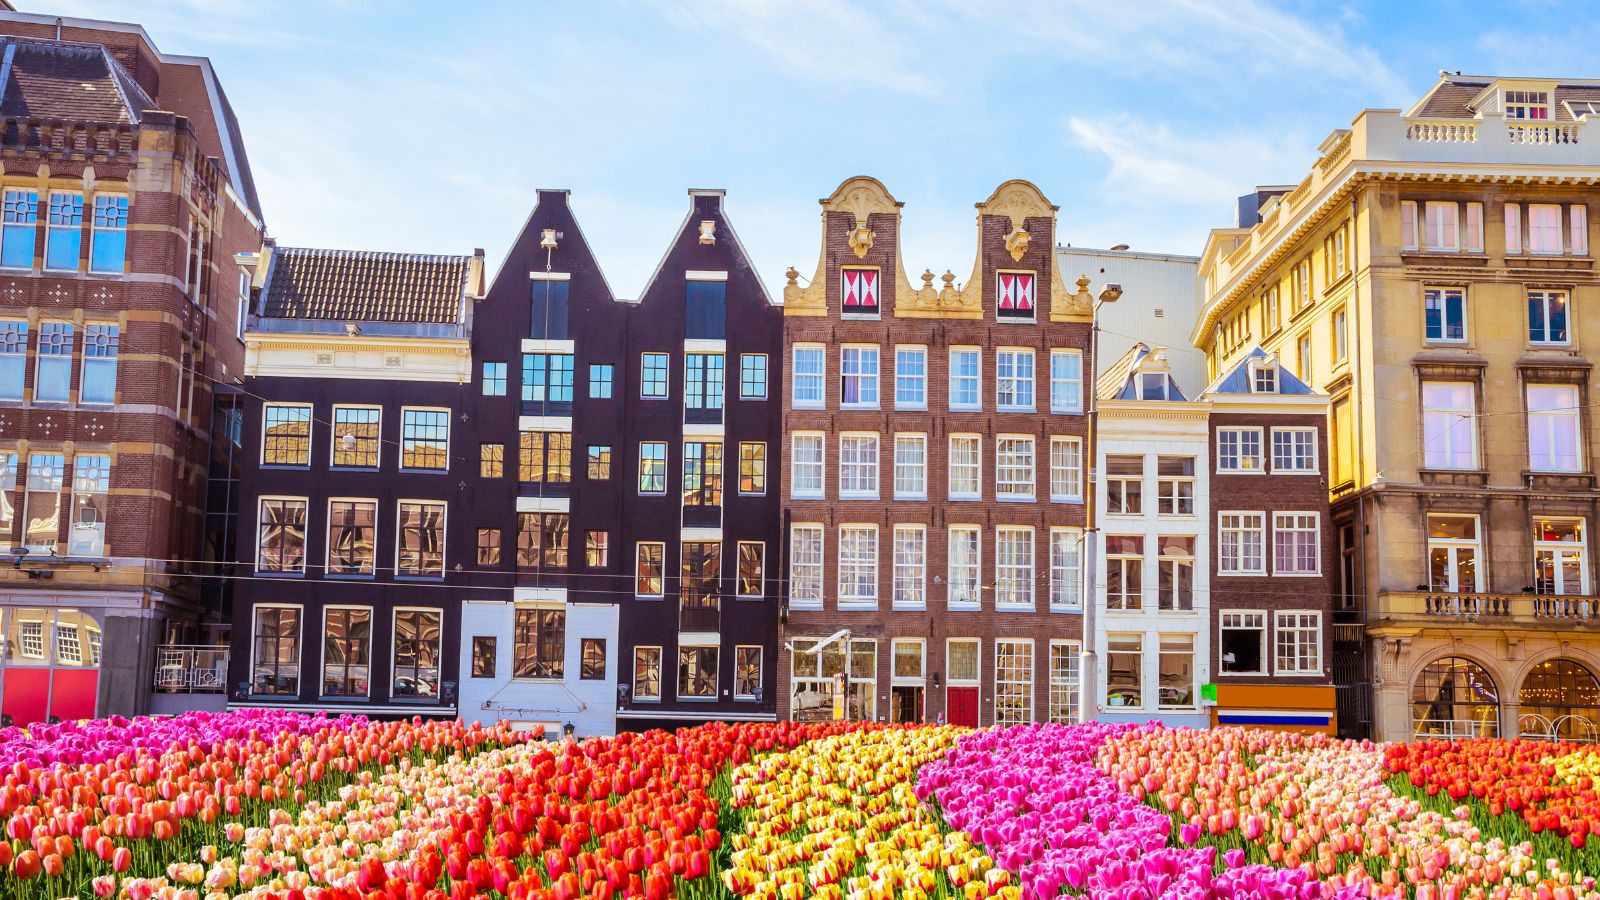 <p>Amsterdam is a vibrant city known for its picturesque canals, historic buildings, and lively cultural scene. Spend your days cycling along the scenic canal routes, <a href="https://www.brighterthingsplanning.com/6-days-in-amsterdam/">visiting world-class museums</a> like the Van Gogh Museum and Anne Frank House, and exploring the charming neighborhoods of Jordaan and De Pijp.</p><p>In addition to its rich history and culture, Amsterdam offers a fantastic food scene, with numerous trendy cafes, markets, and restaurants. Take a canal cruise to see the city from a unique perspective or relax in the expansive Vondelpark. Amsterdam’s blend of historic charm and modern amenities makes it a perfect summer destination.</p>